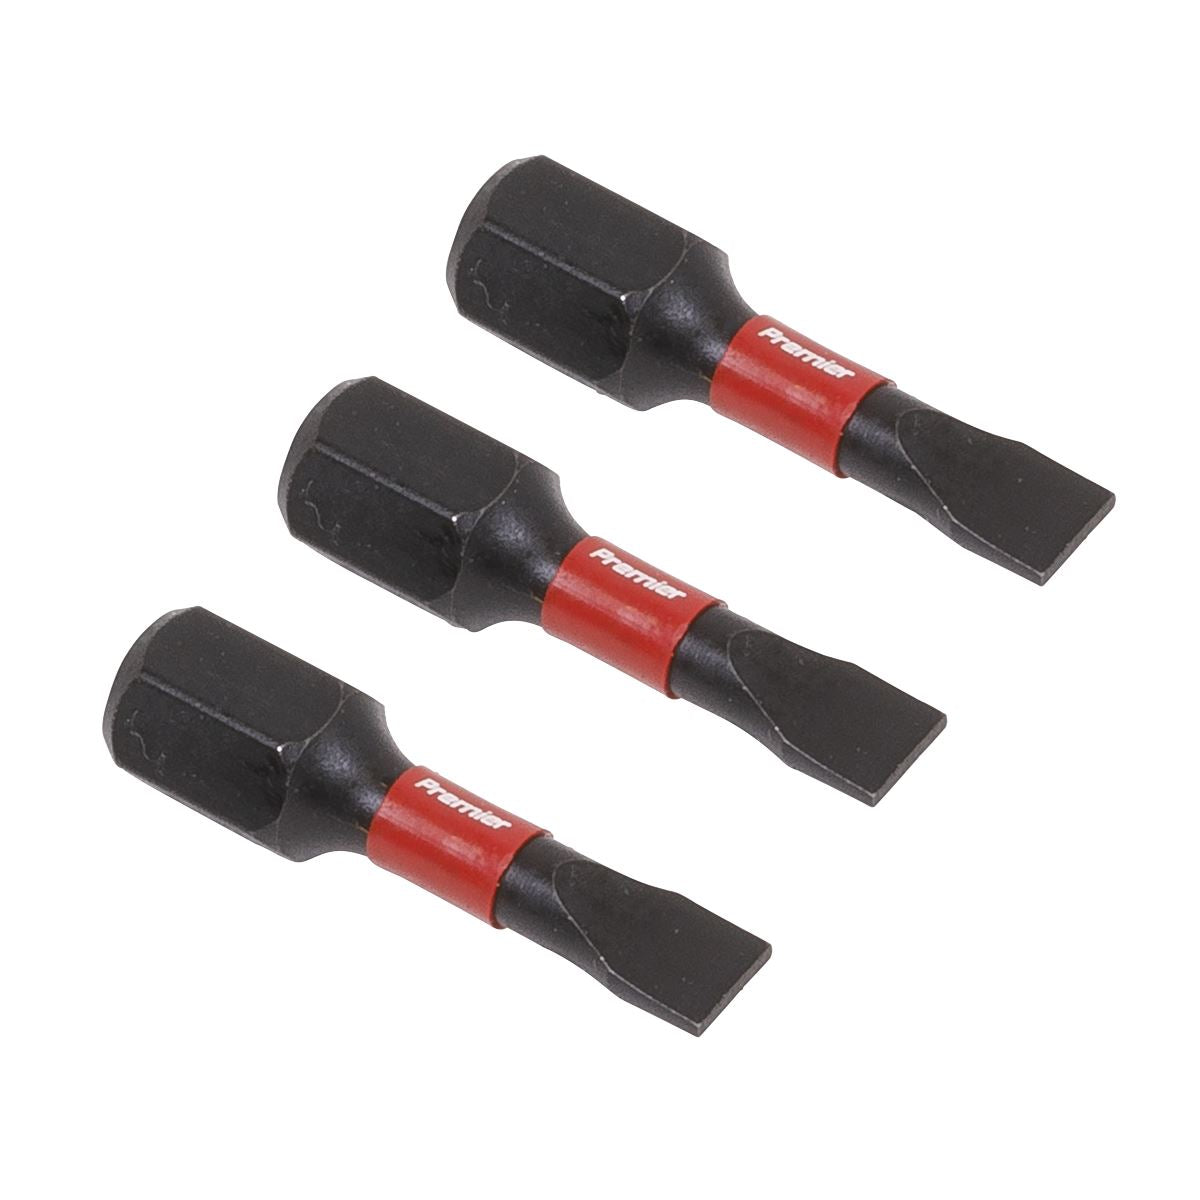 Sealey Premier Slotted 4.5mm Impact Power Tool Bits 25mm - 3pc